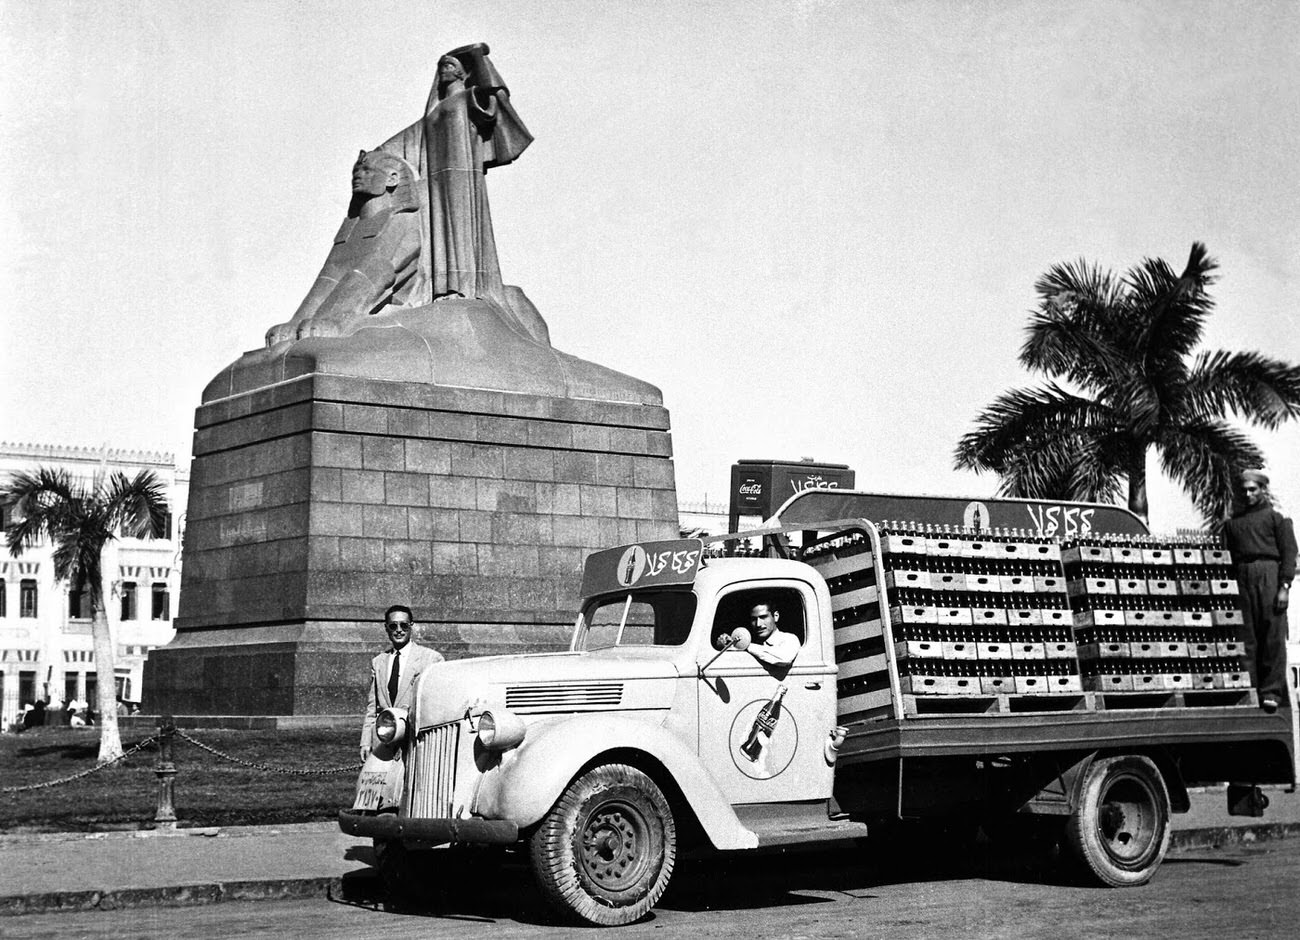 A a Coca-Cola delivery truck next to a statue in Egypt, 1950.